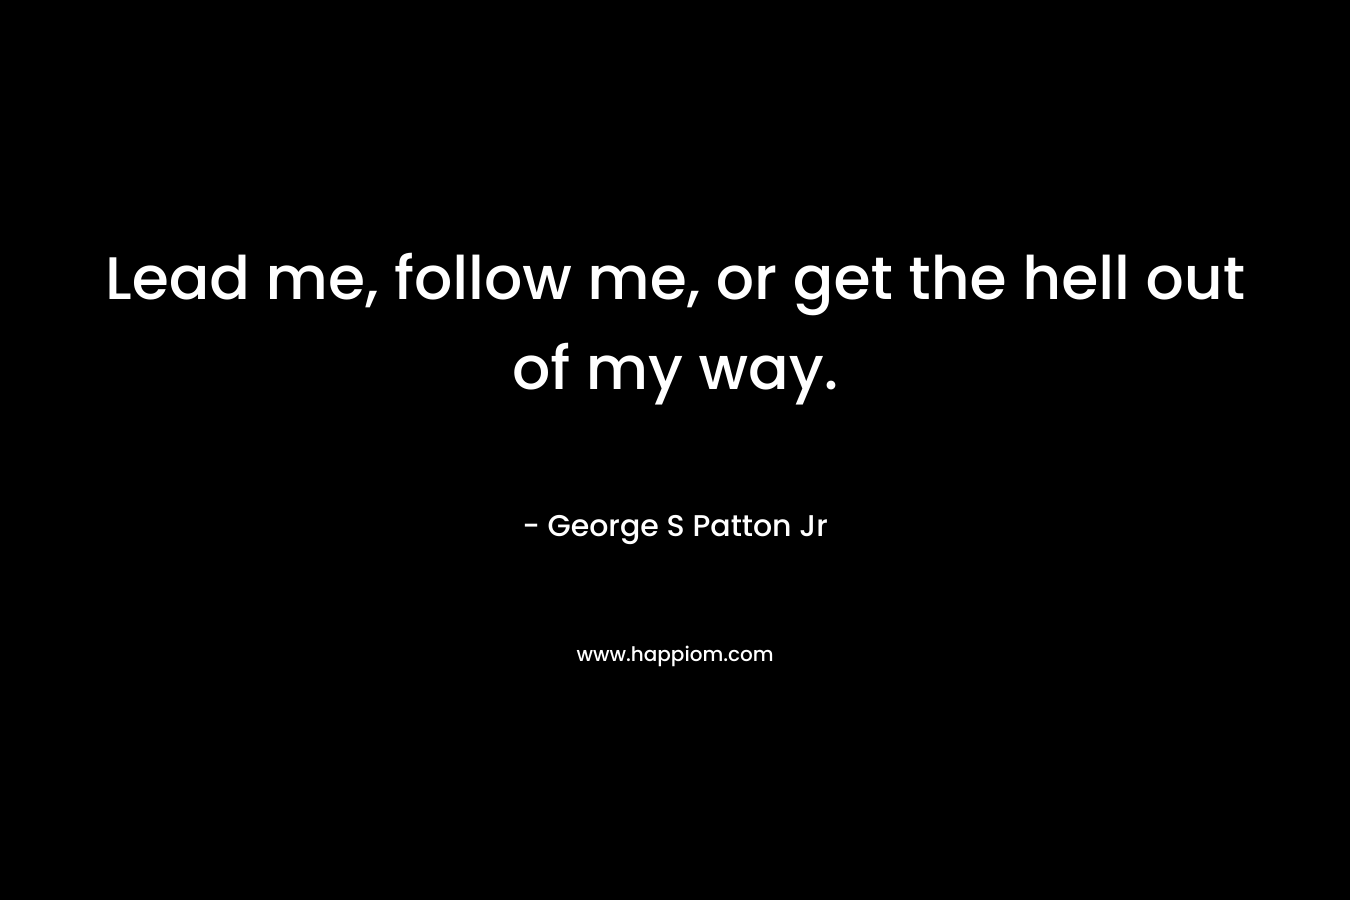 Lead me, follow me, or get the hell out of my way.